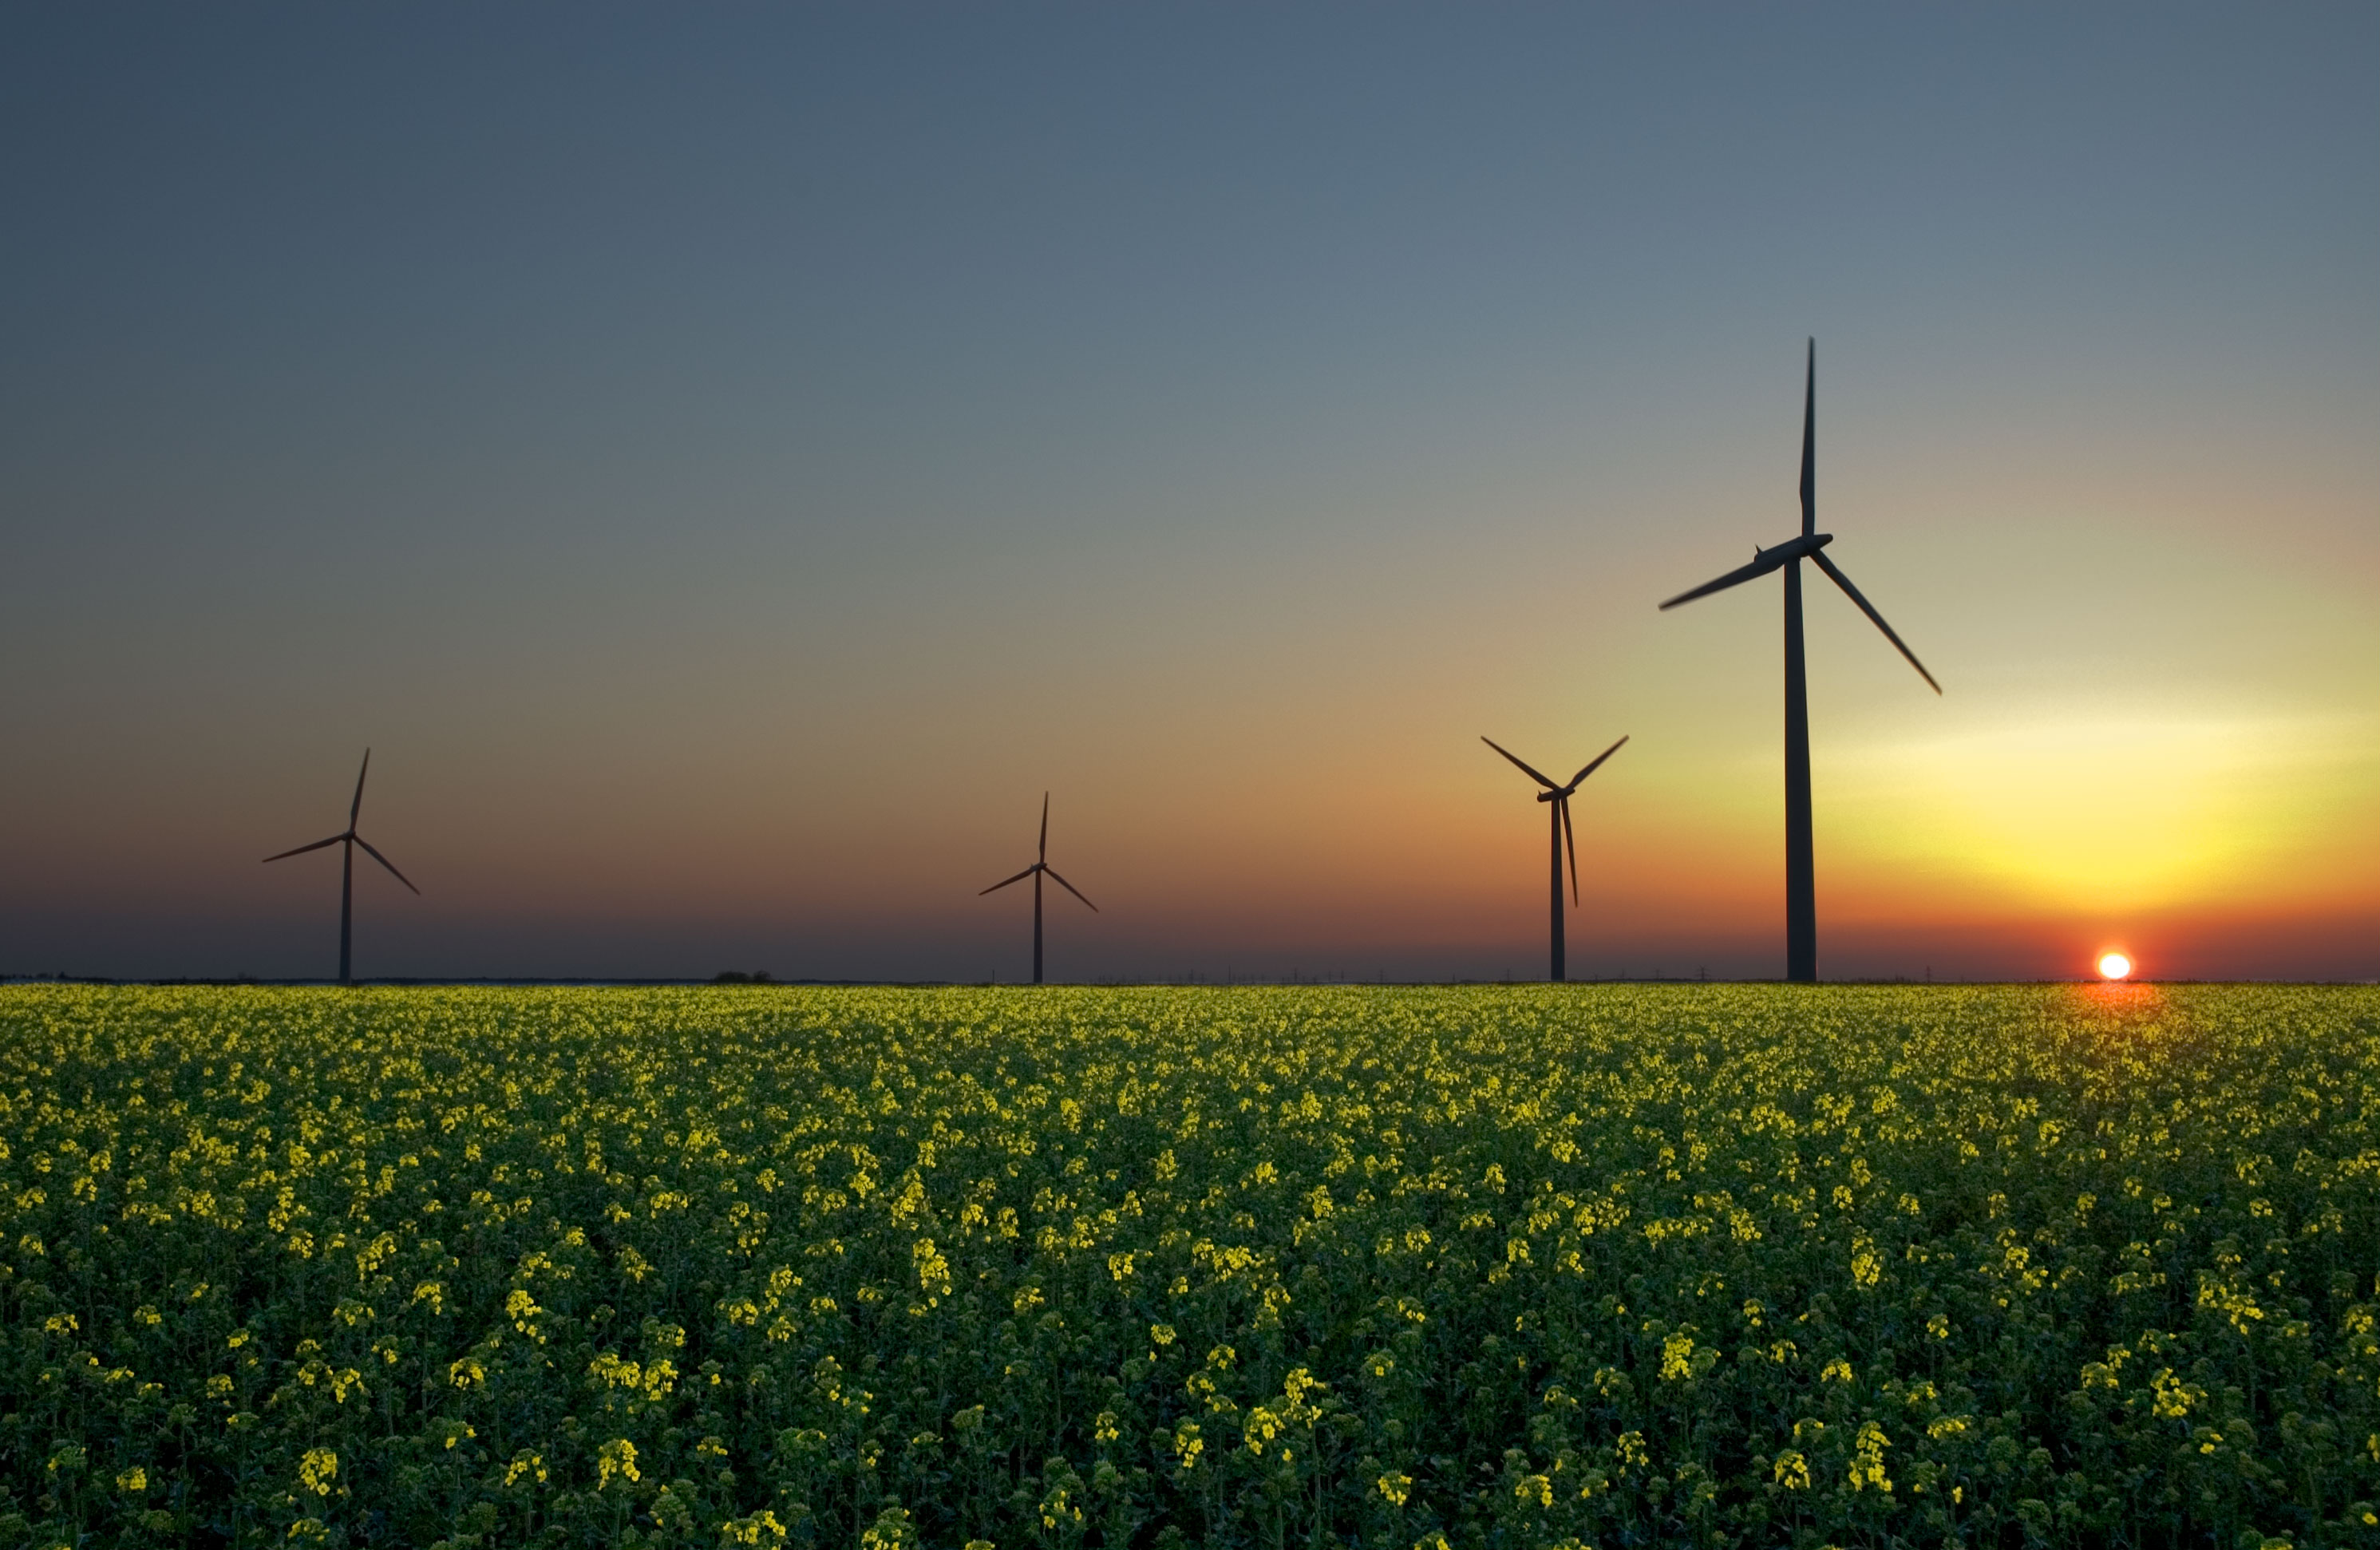 The energy debate: Renewable energy cannot replace fossil fuels - DevelopmentEducation.ie